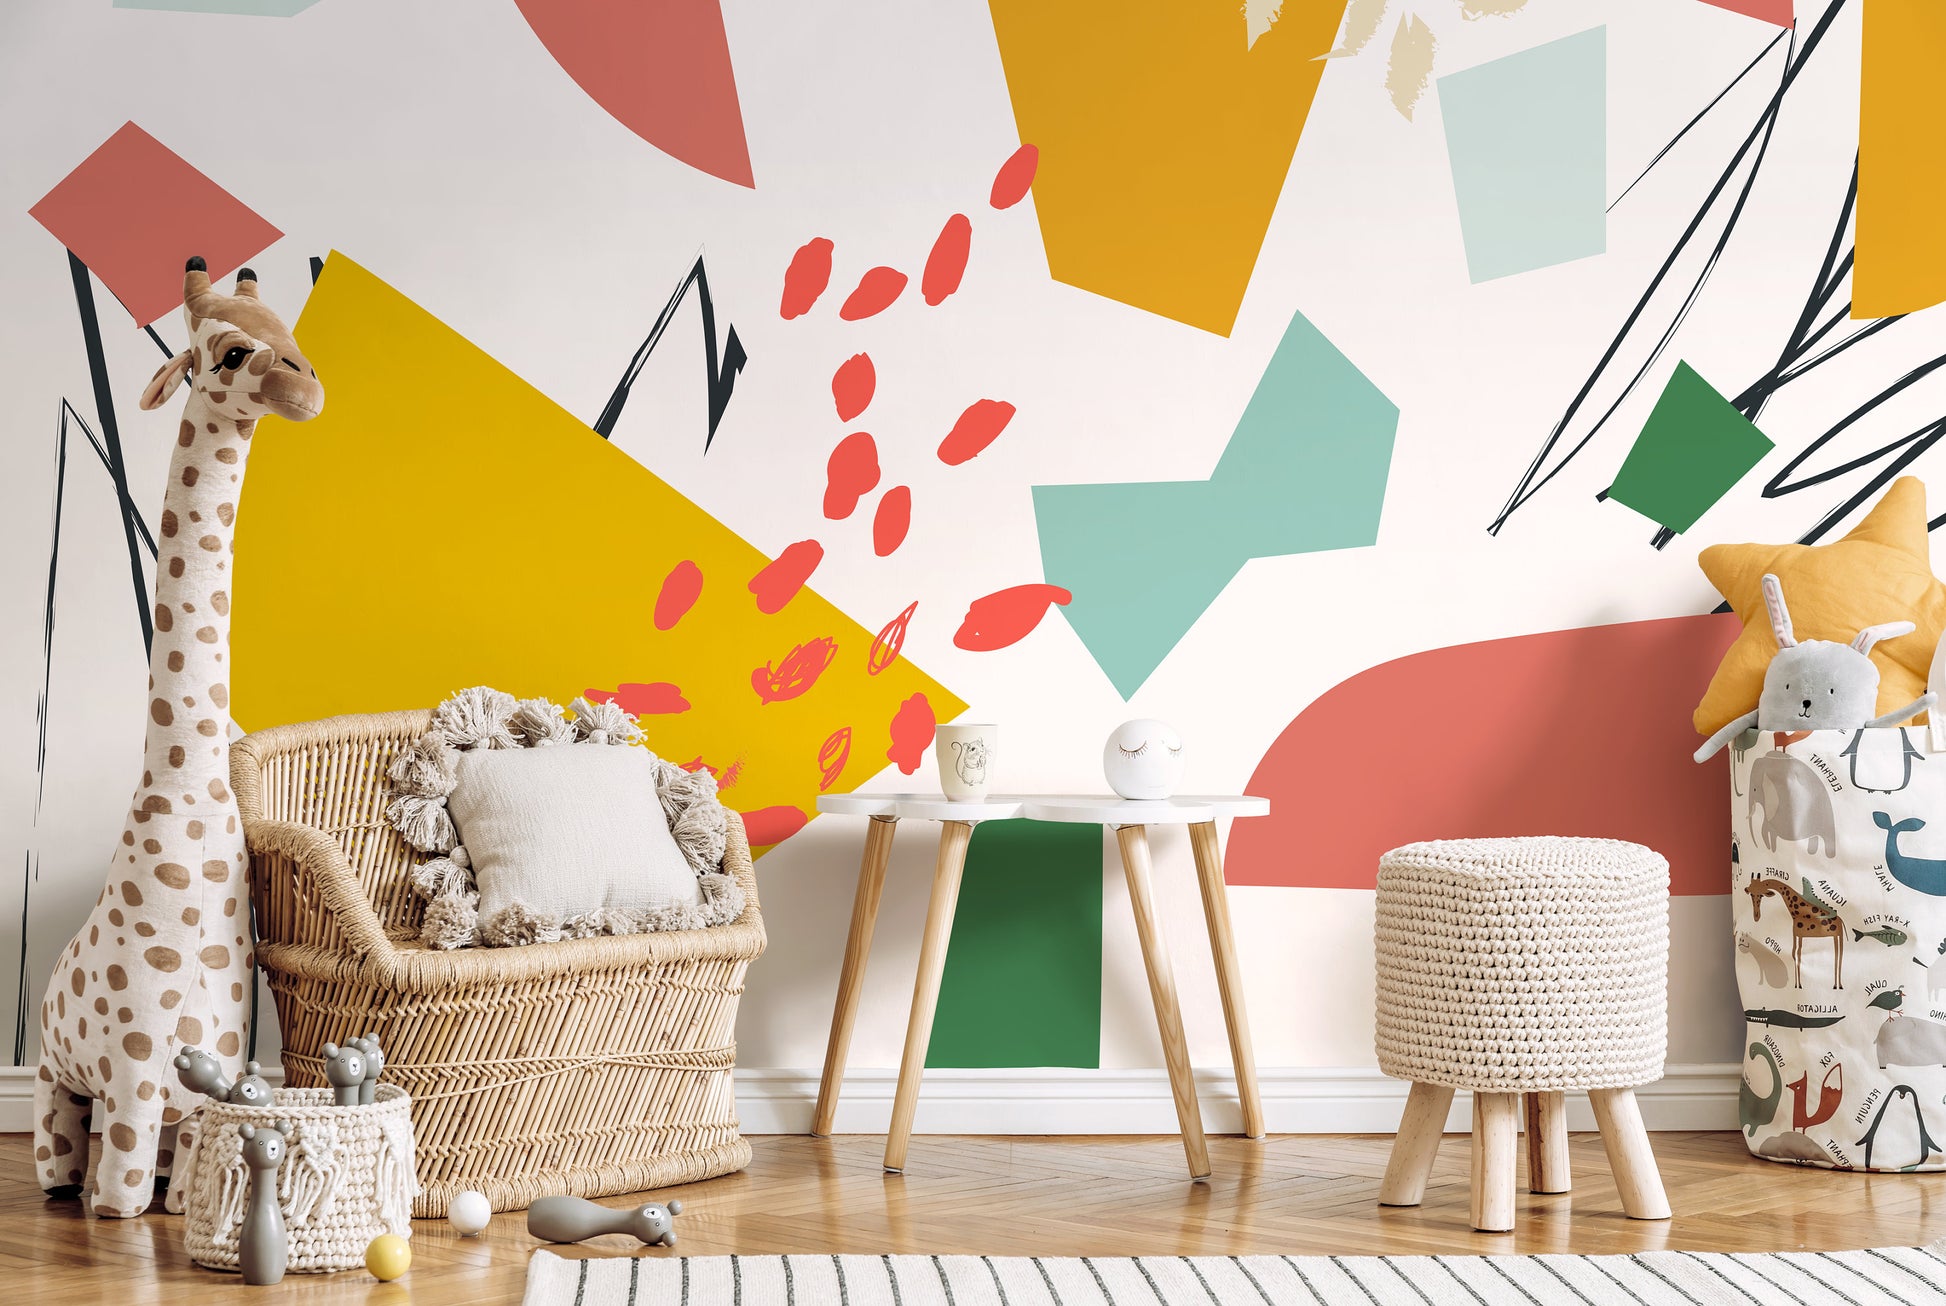 Abstract Colorful Wallpaper Removable Wallpaper Home Decor Wall Art Room Decor / Colorful Abstract Mural Wallpaper - B748